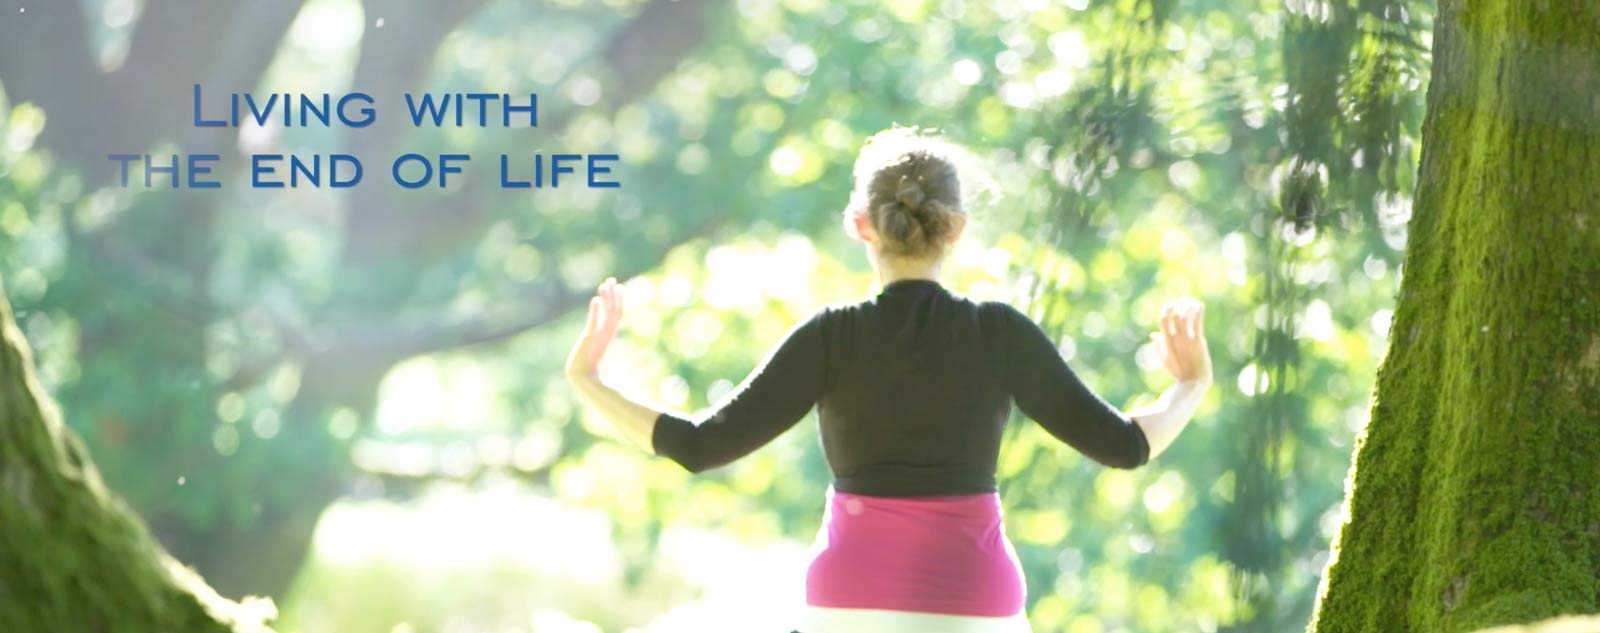 Living with the End of Life - image of Kate Carter, Senior Dru Yoga teacher trainer